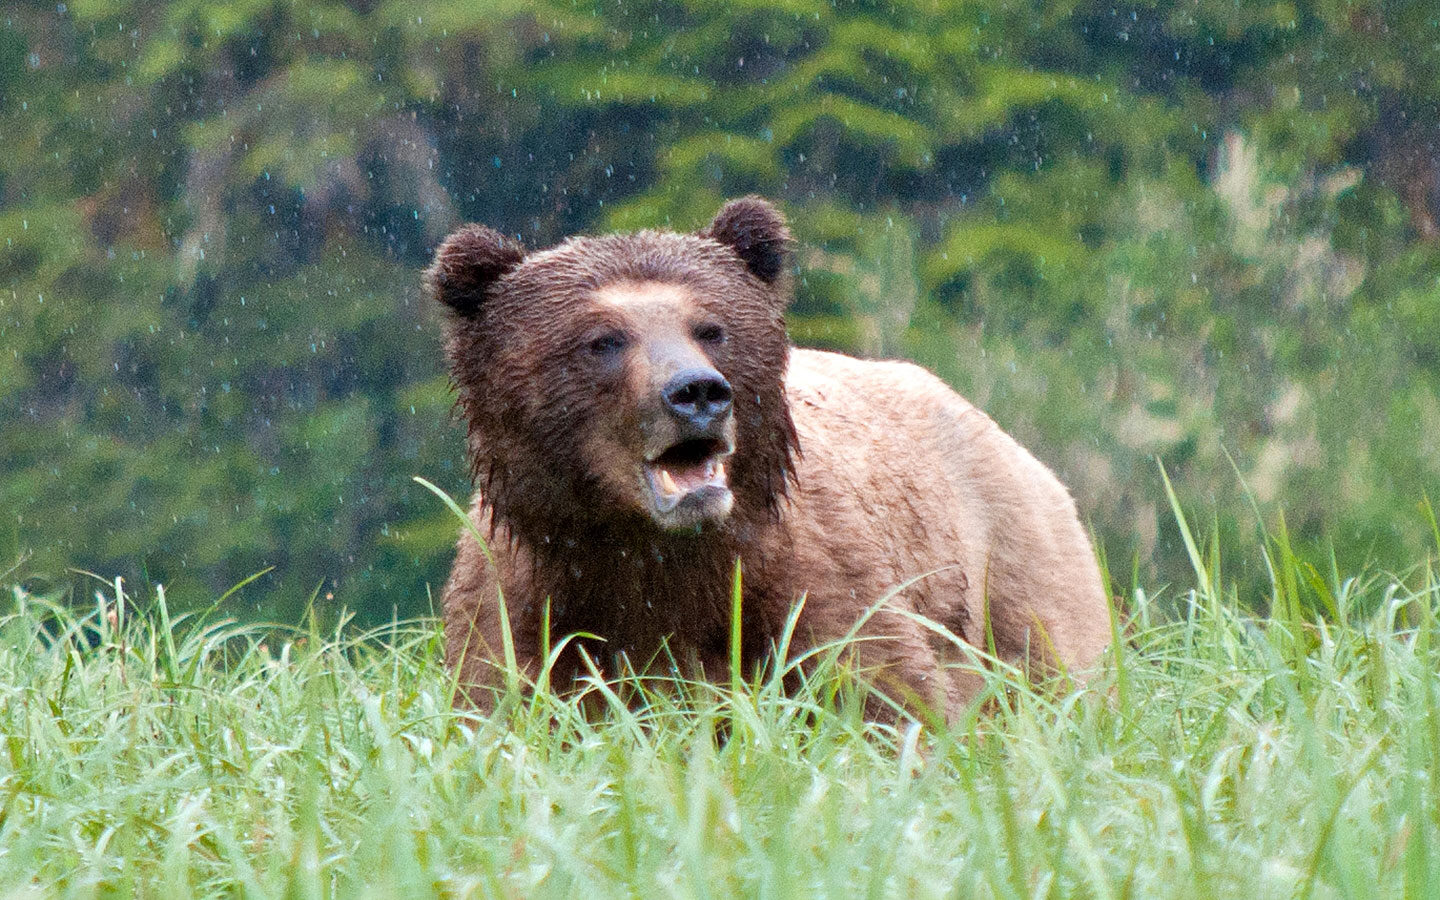 Grizzly bear-watching in British Columbia at the Great Bear Lodge